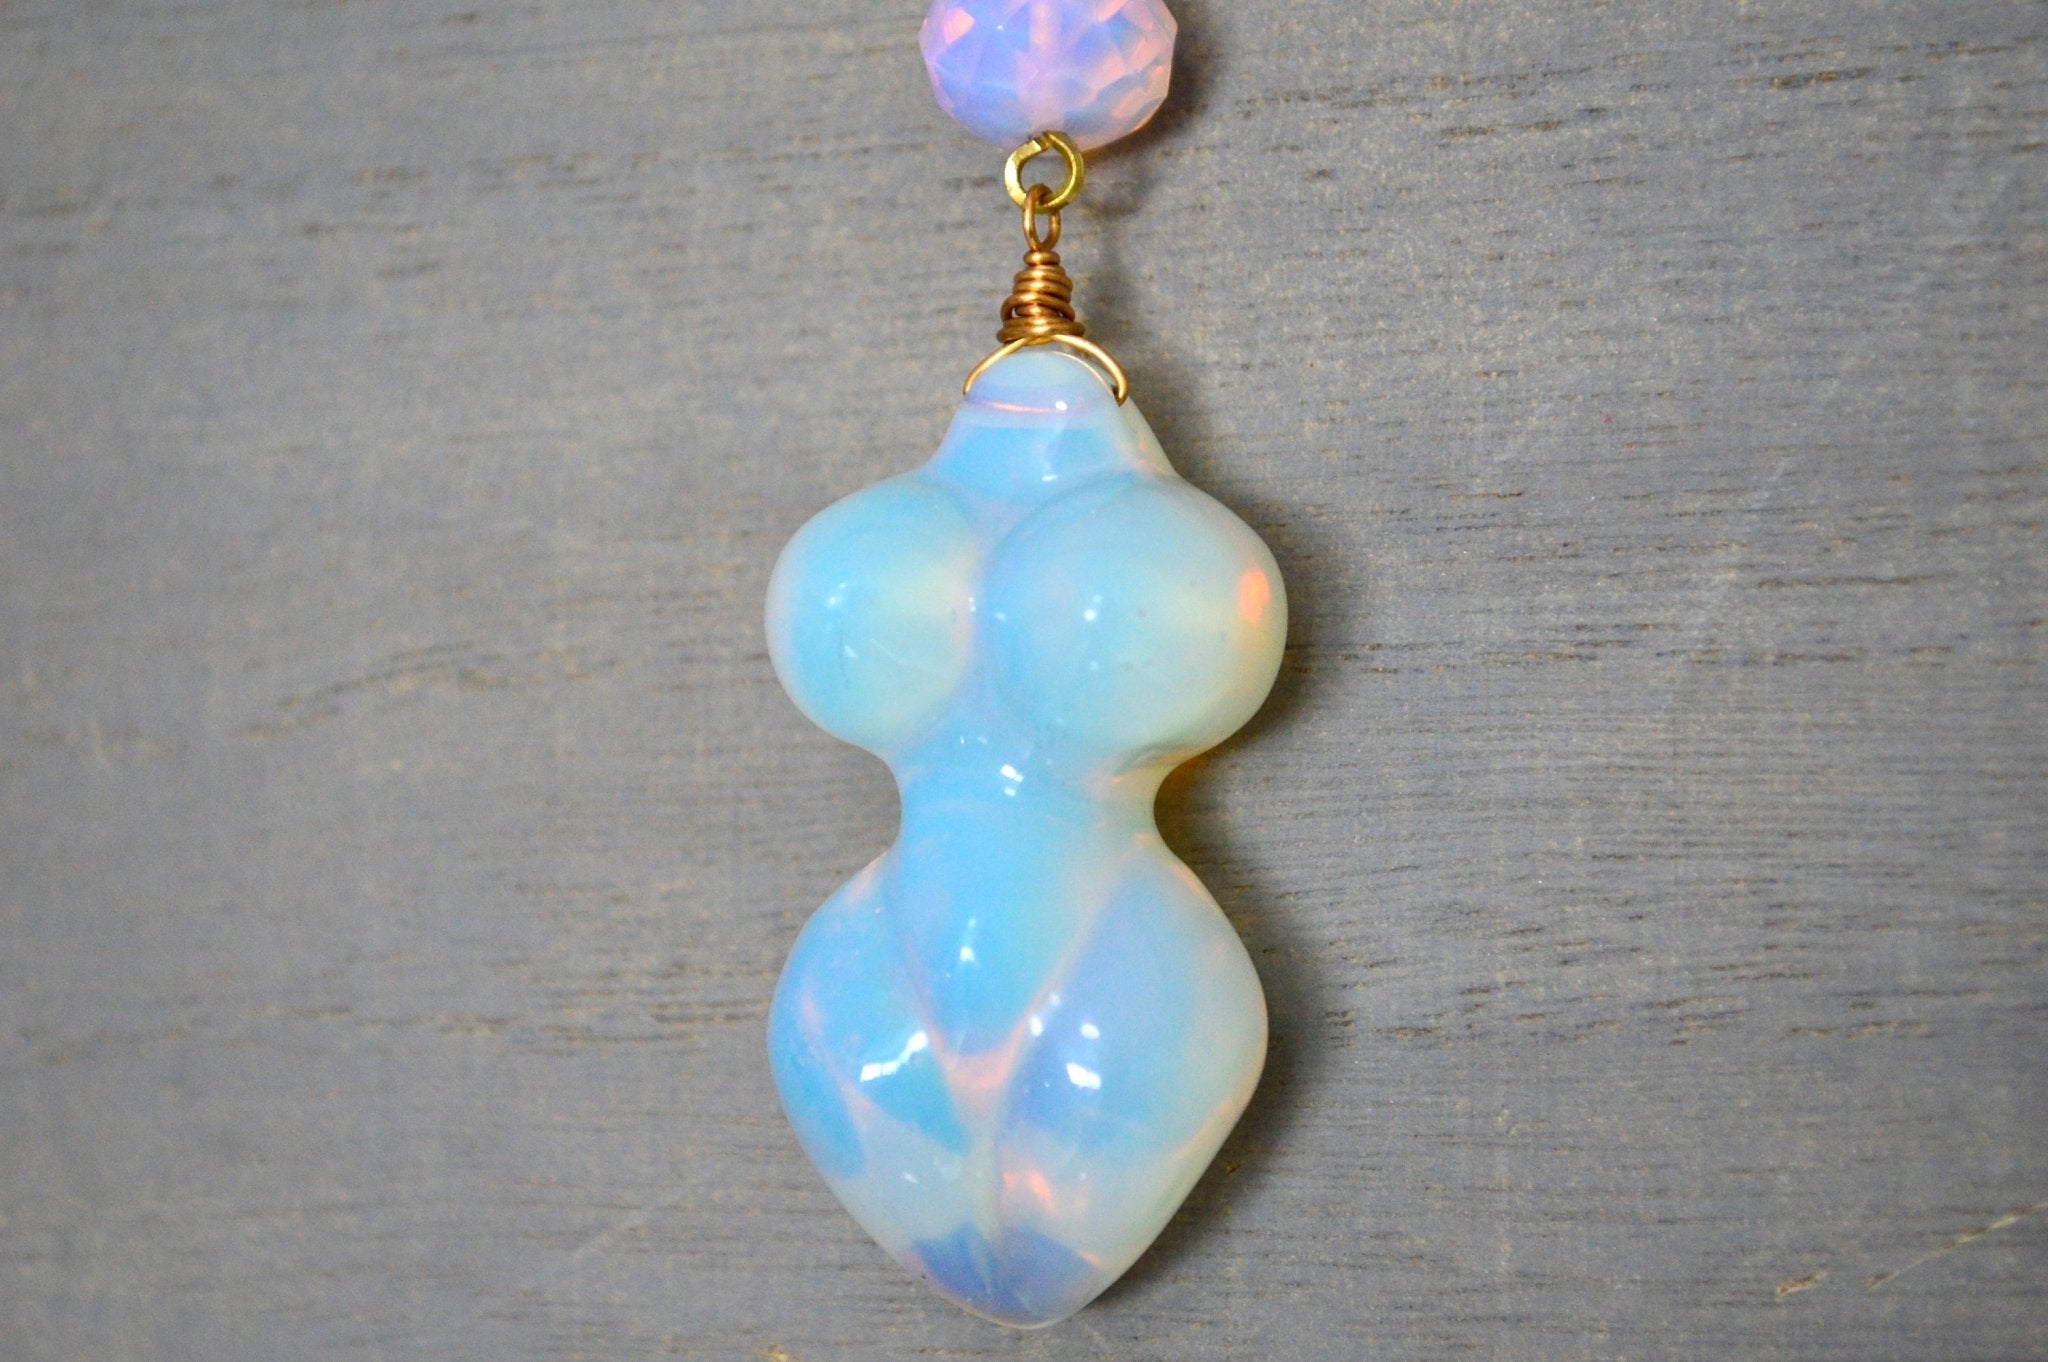 The Moon Goddess Opalite Necklace - We Love Brass